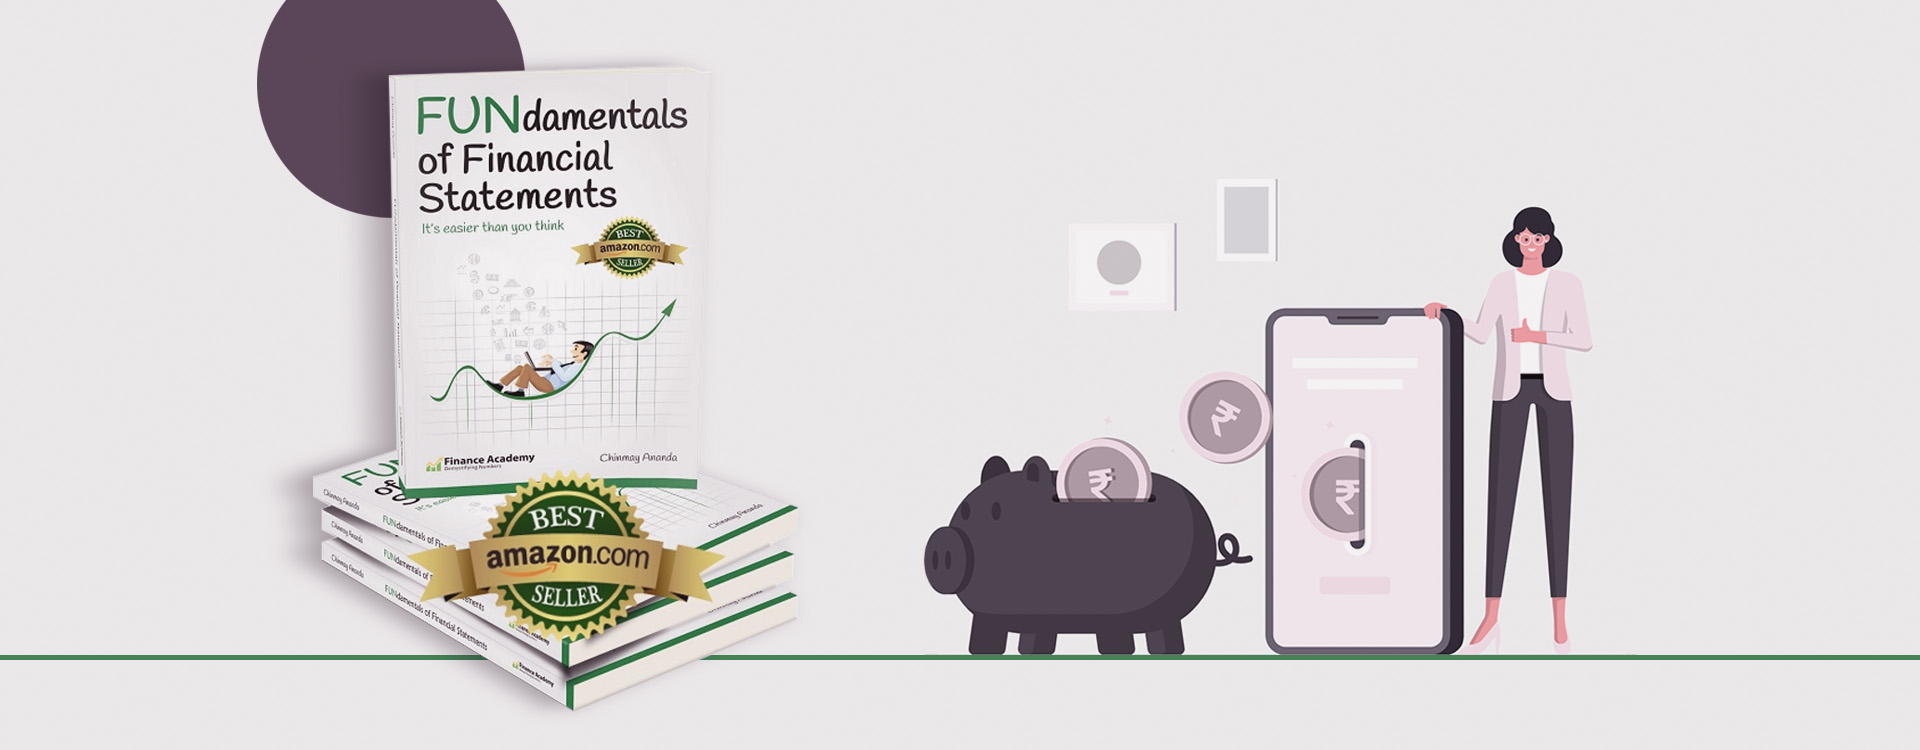 Book Review of FUNdamentals of Financial Statements